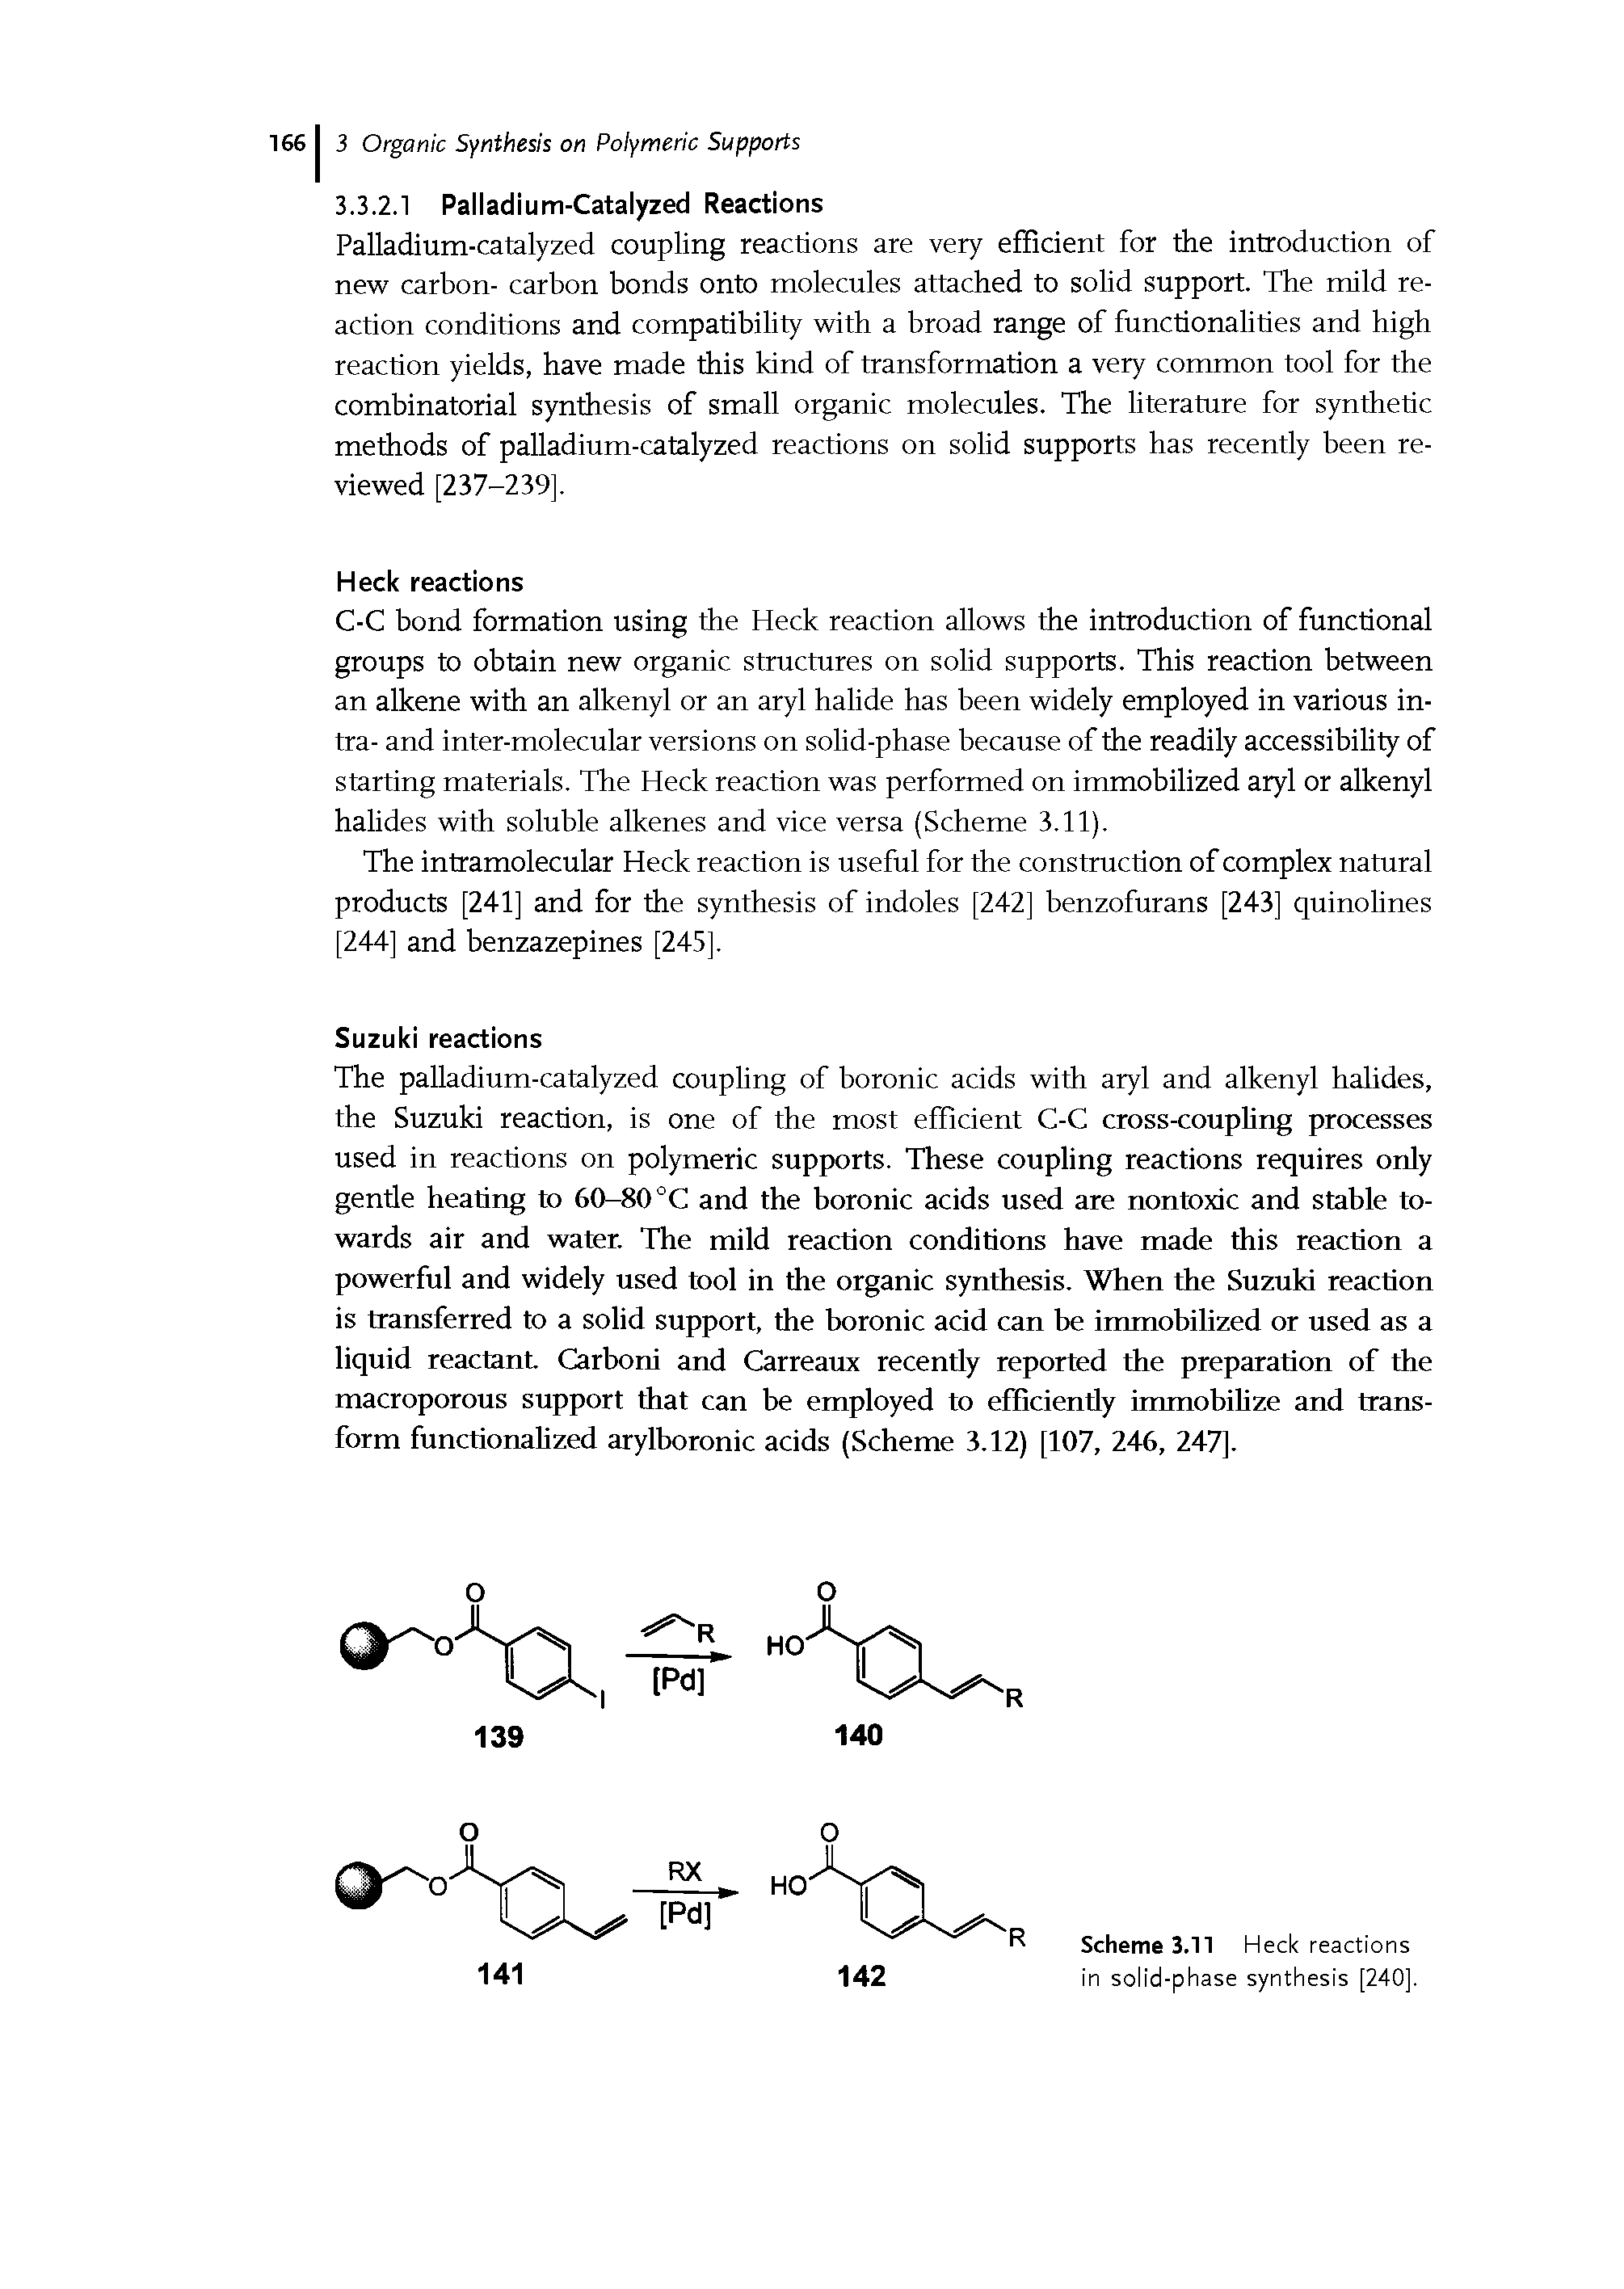 Scheme 3.11 Heck reactions in solid-phase synthesis [240].